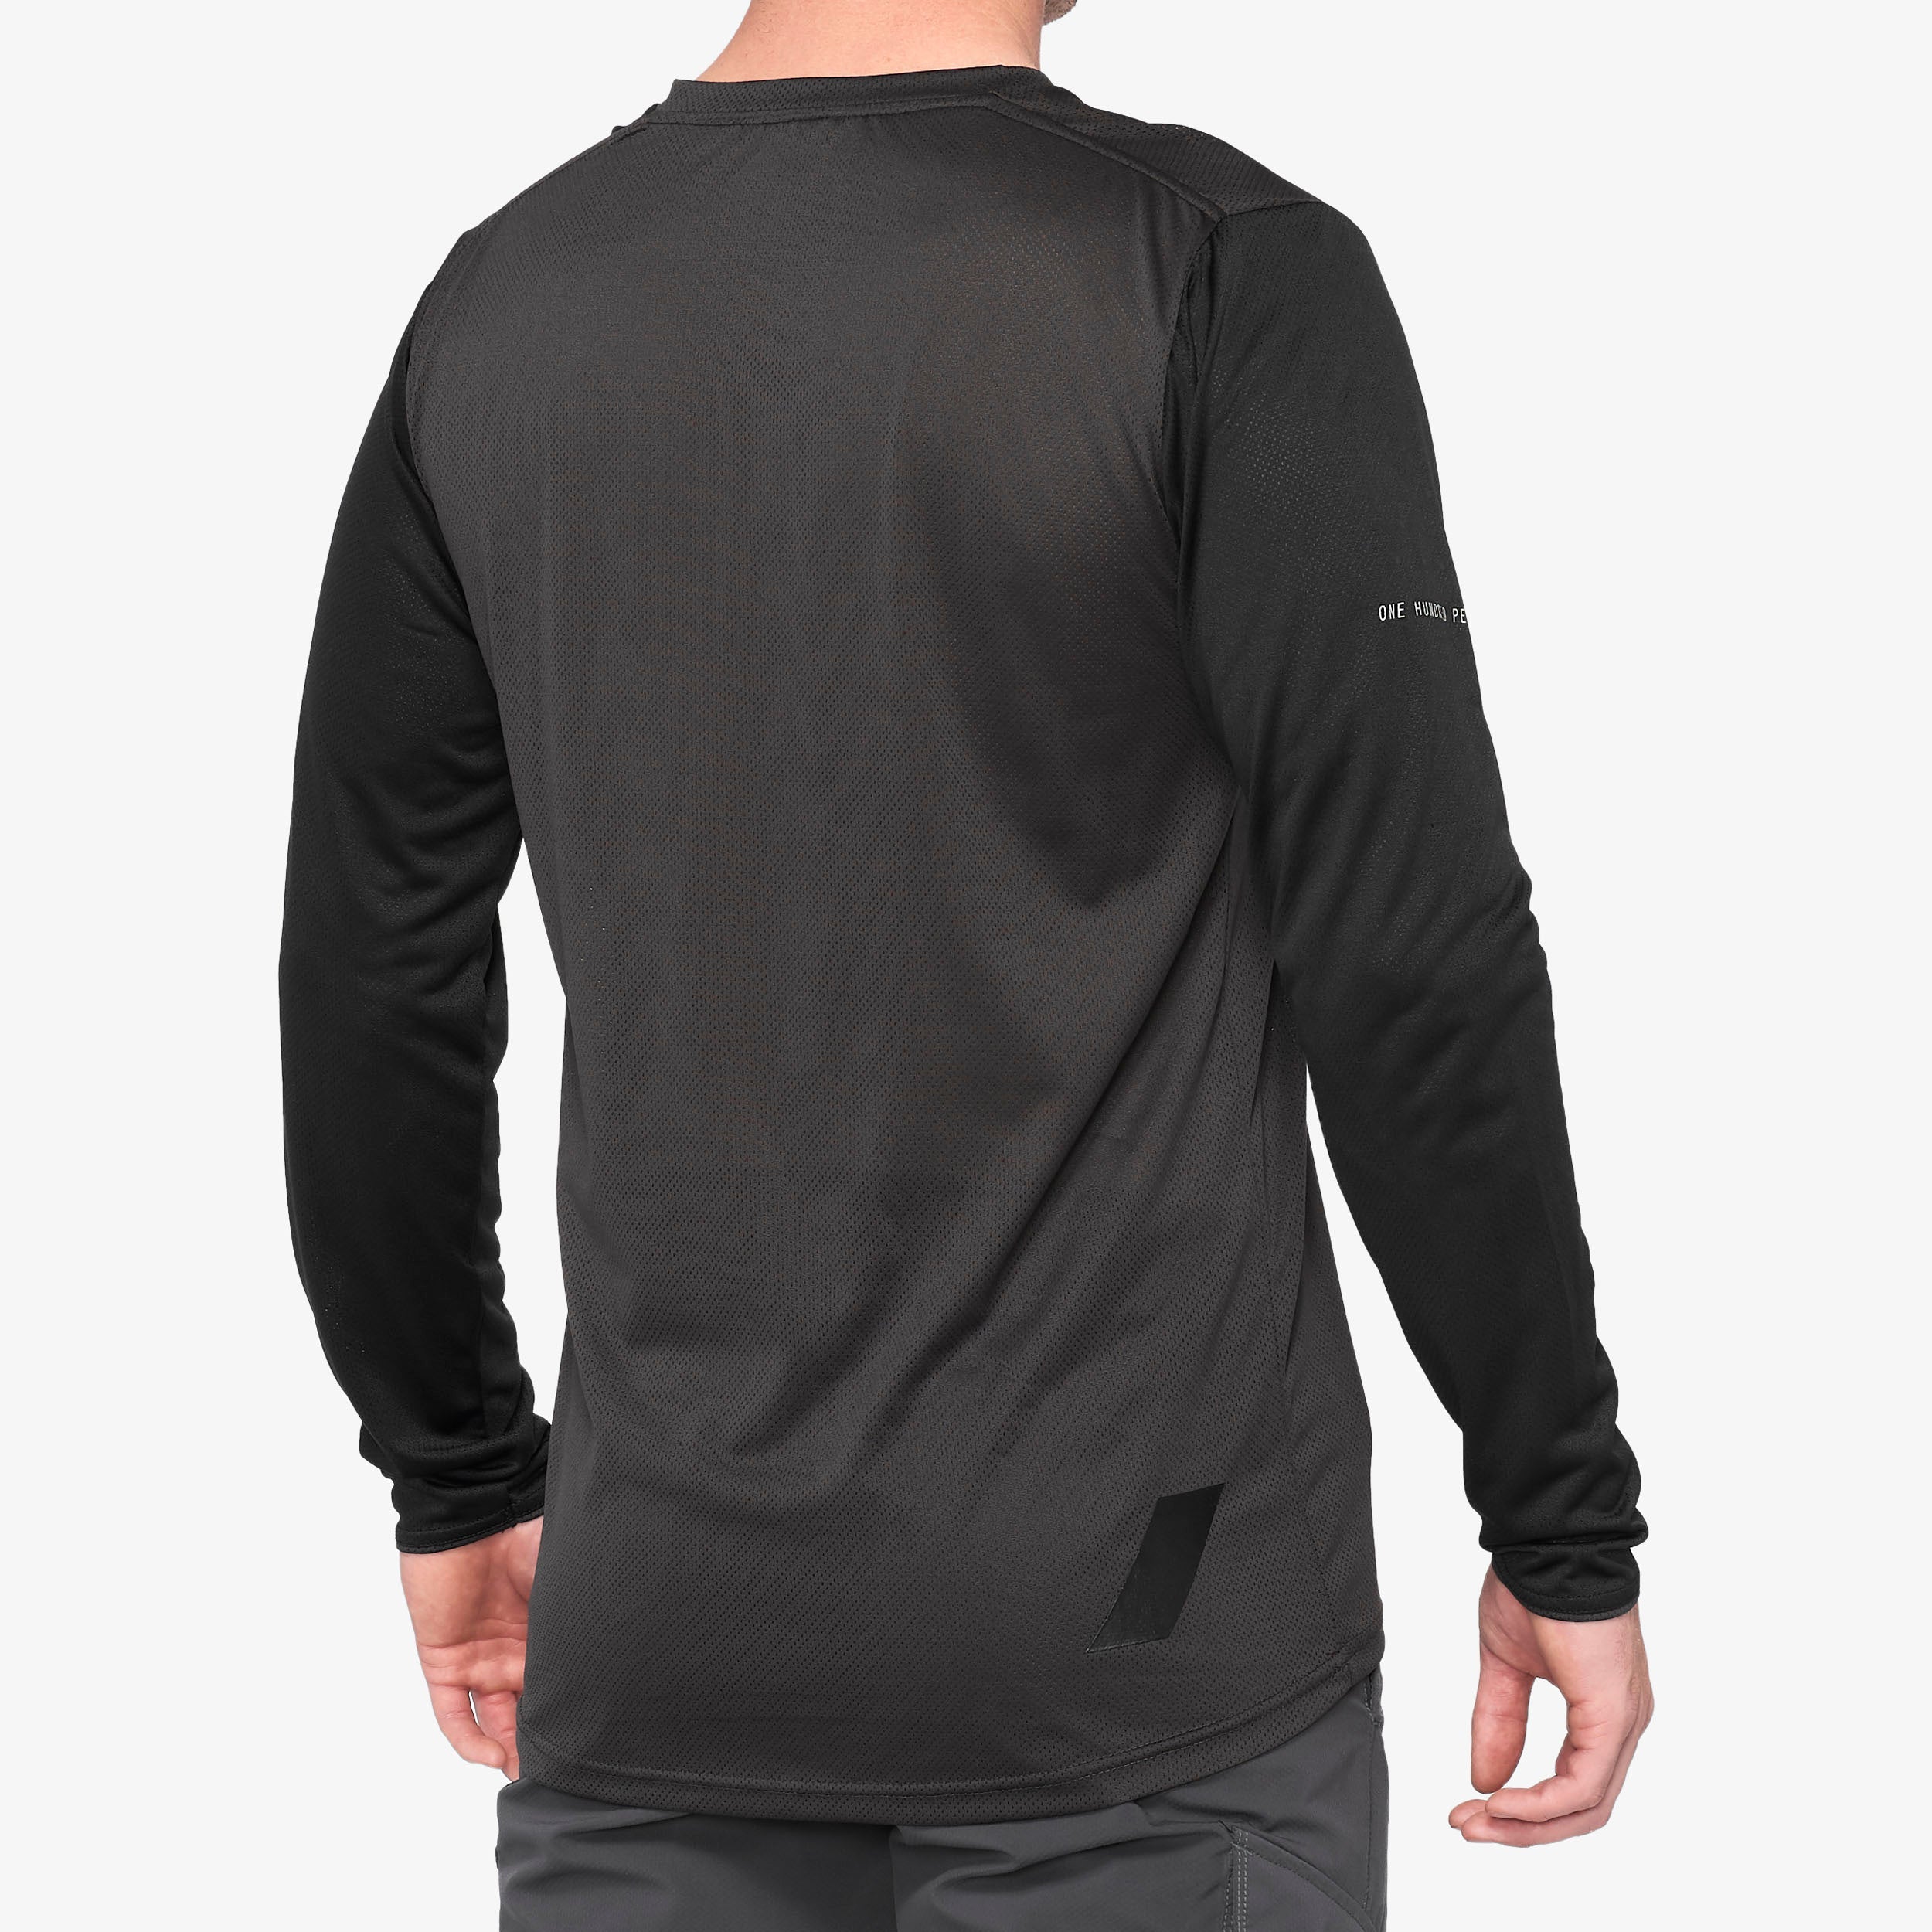 RIDECAMP Long Sleeve Jersey Black/Charcoal - Secondary